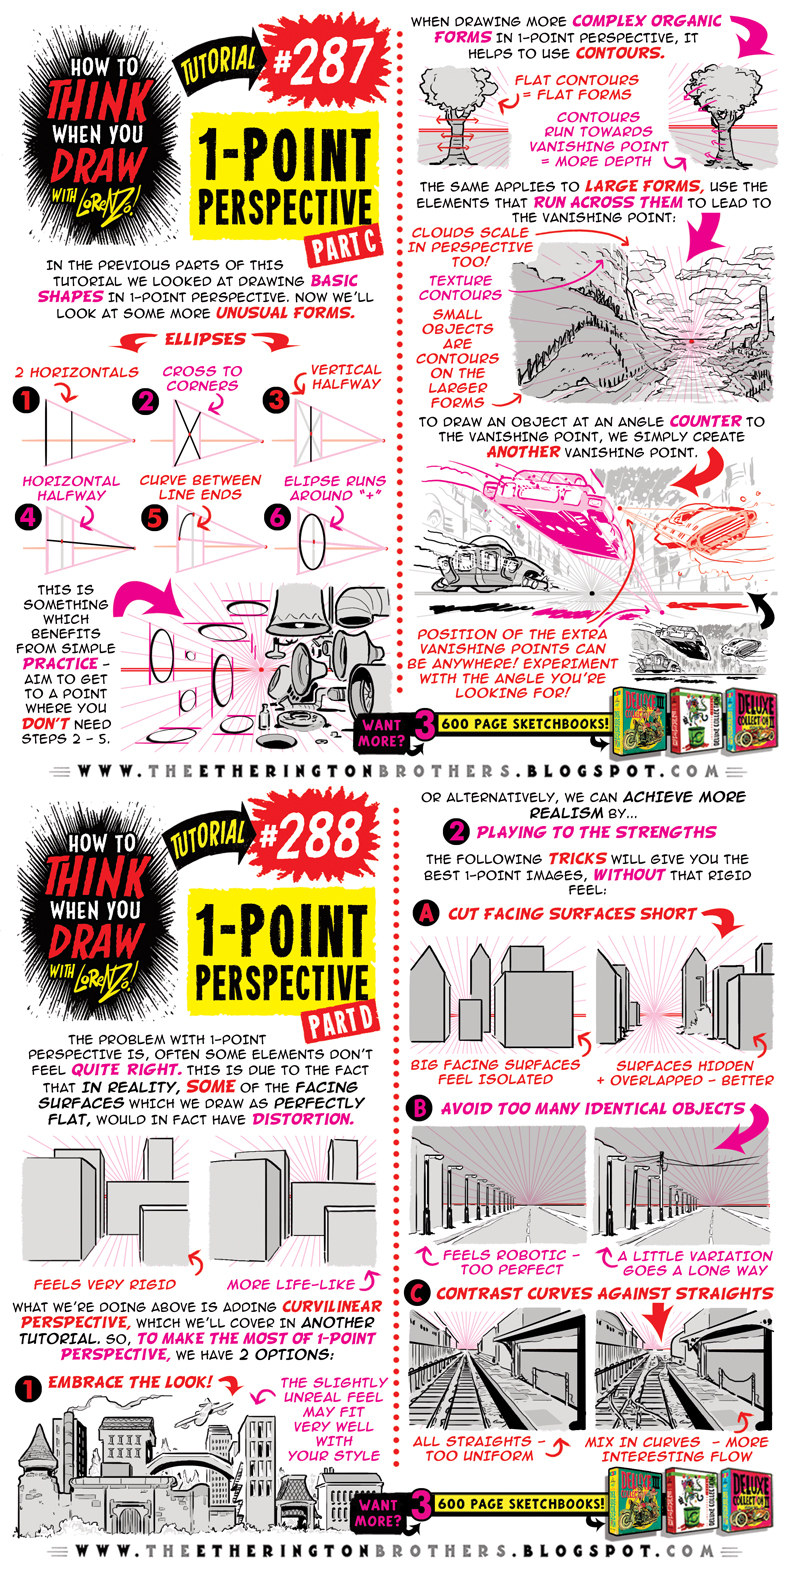 How to THINK when you draw 1-POINT PERSPECTIVE pt2 by ...